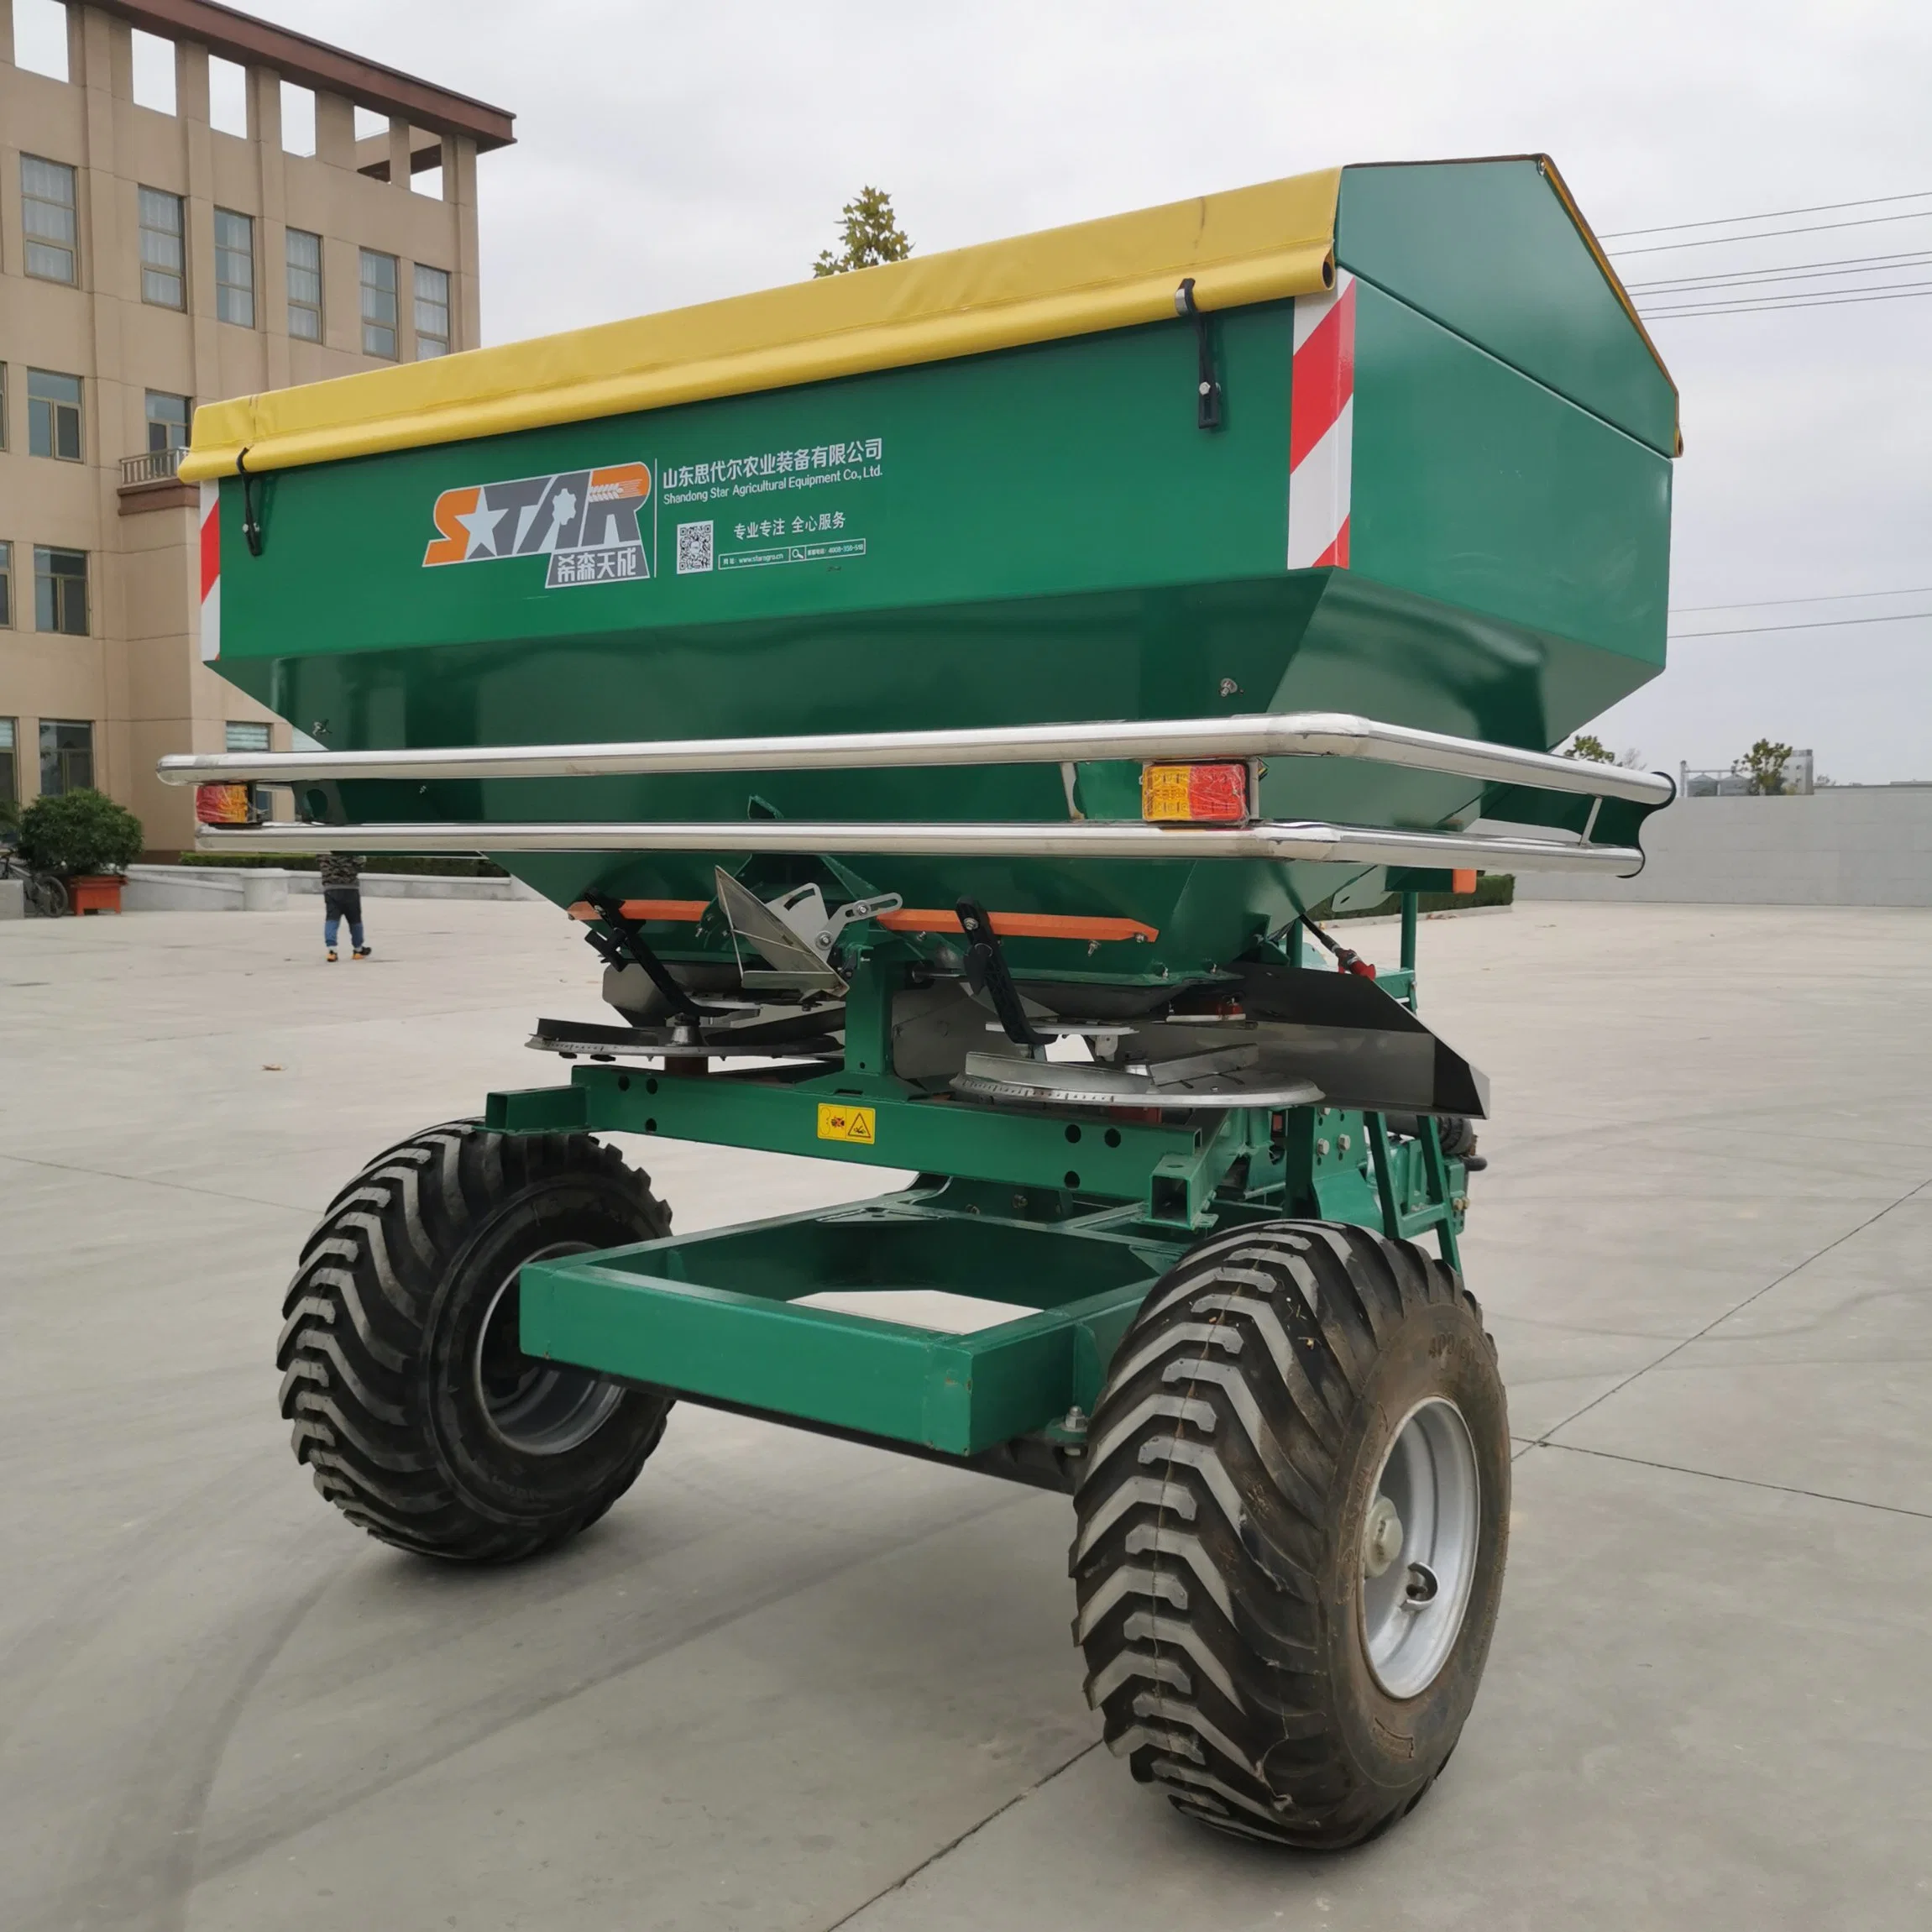 China Leading Brand Sidaier Agricultural Machinery High Working Efficiency Good Performance Larger Fertilizer Box Volume Fertilizer Spreader